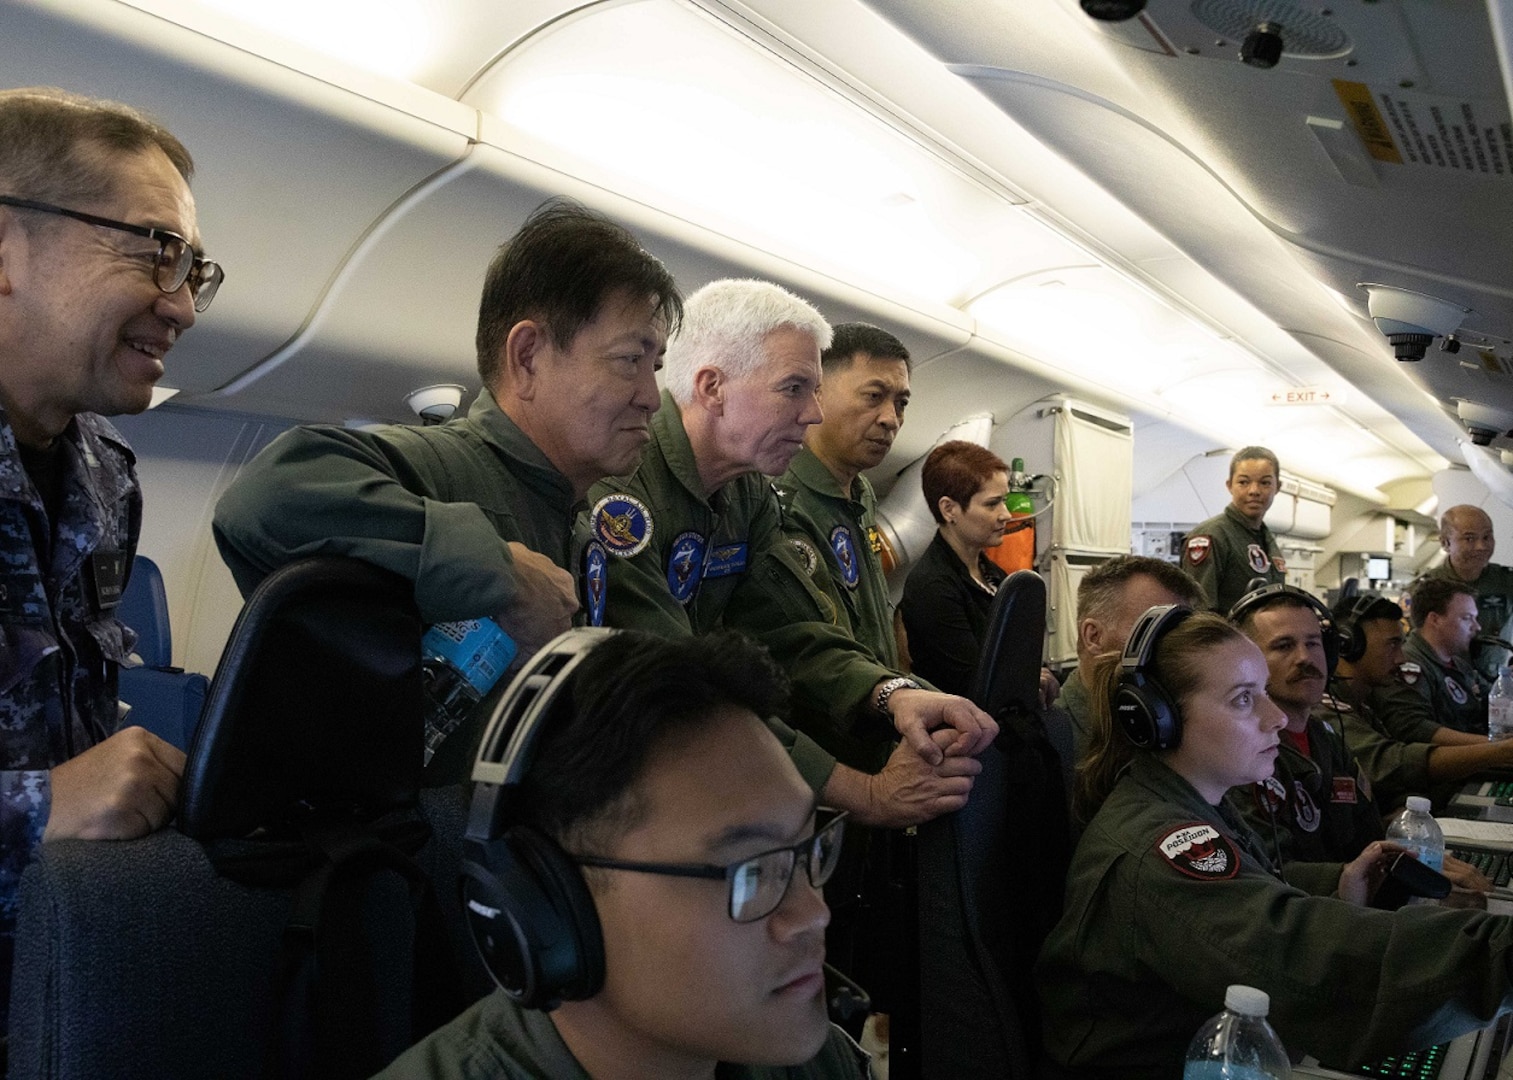 Japan Maritime Self-Defense Force (JMSDF) Capt. ICHIYANAGI Kimihiko; JMSDF Commander-in-Chief Self-Defense Fleet Vice Adm. SAITO Akira; Commander, U.S. 7th Fleet Vice Adm. Karl Thomas; and Naval Air Wing Commander of the Philippine Navy Commodore Juario Marayag observe the crew aboard a P8A Poseidon during a flight demonstration in Manila, Philippines, Aug. 26. U.S. 7th Fleet is the U.S. Navy’s largest forward-deployed numbered fleet, and routinely interacts and operates with allies and partners to preserve a free and open Indo-Pacific.